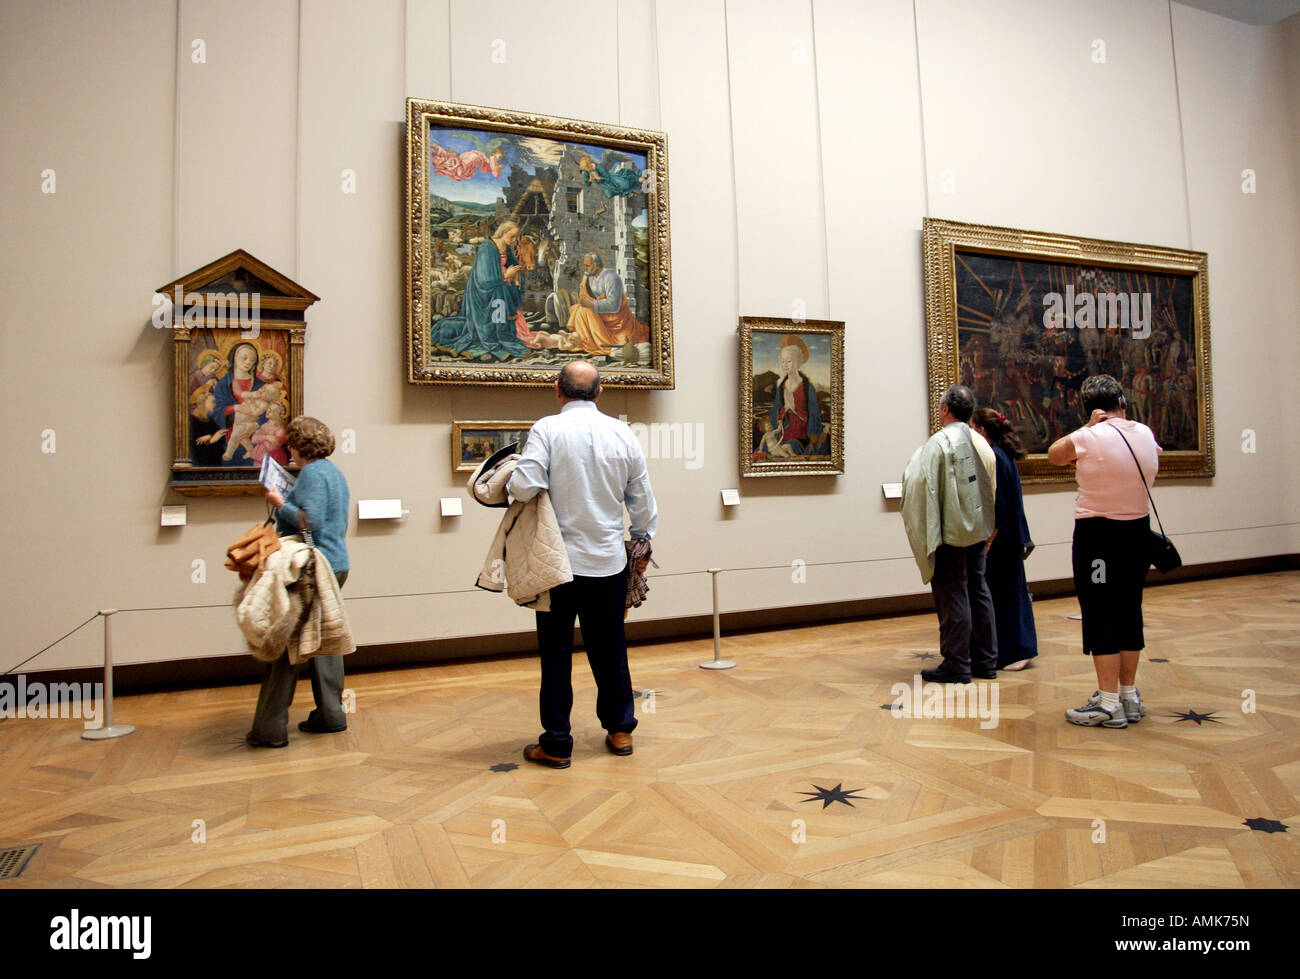 People visiting the Louvre Museum, Paris, France Stock Photo